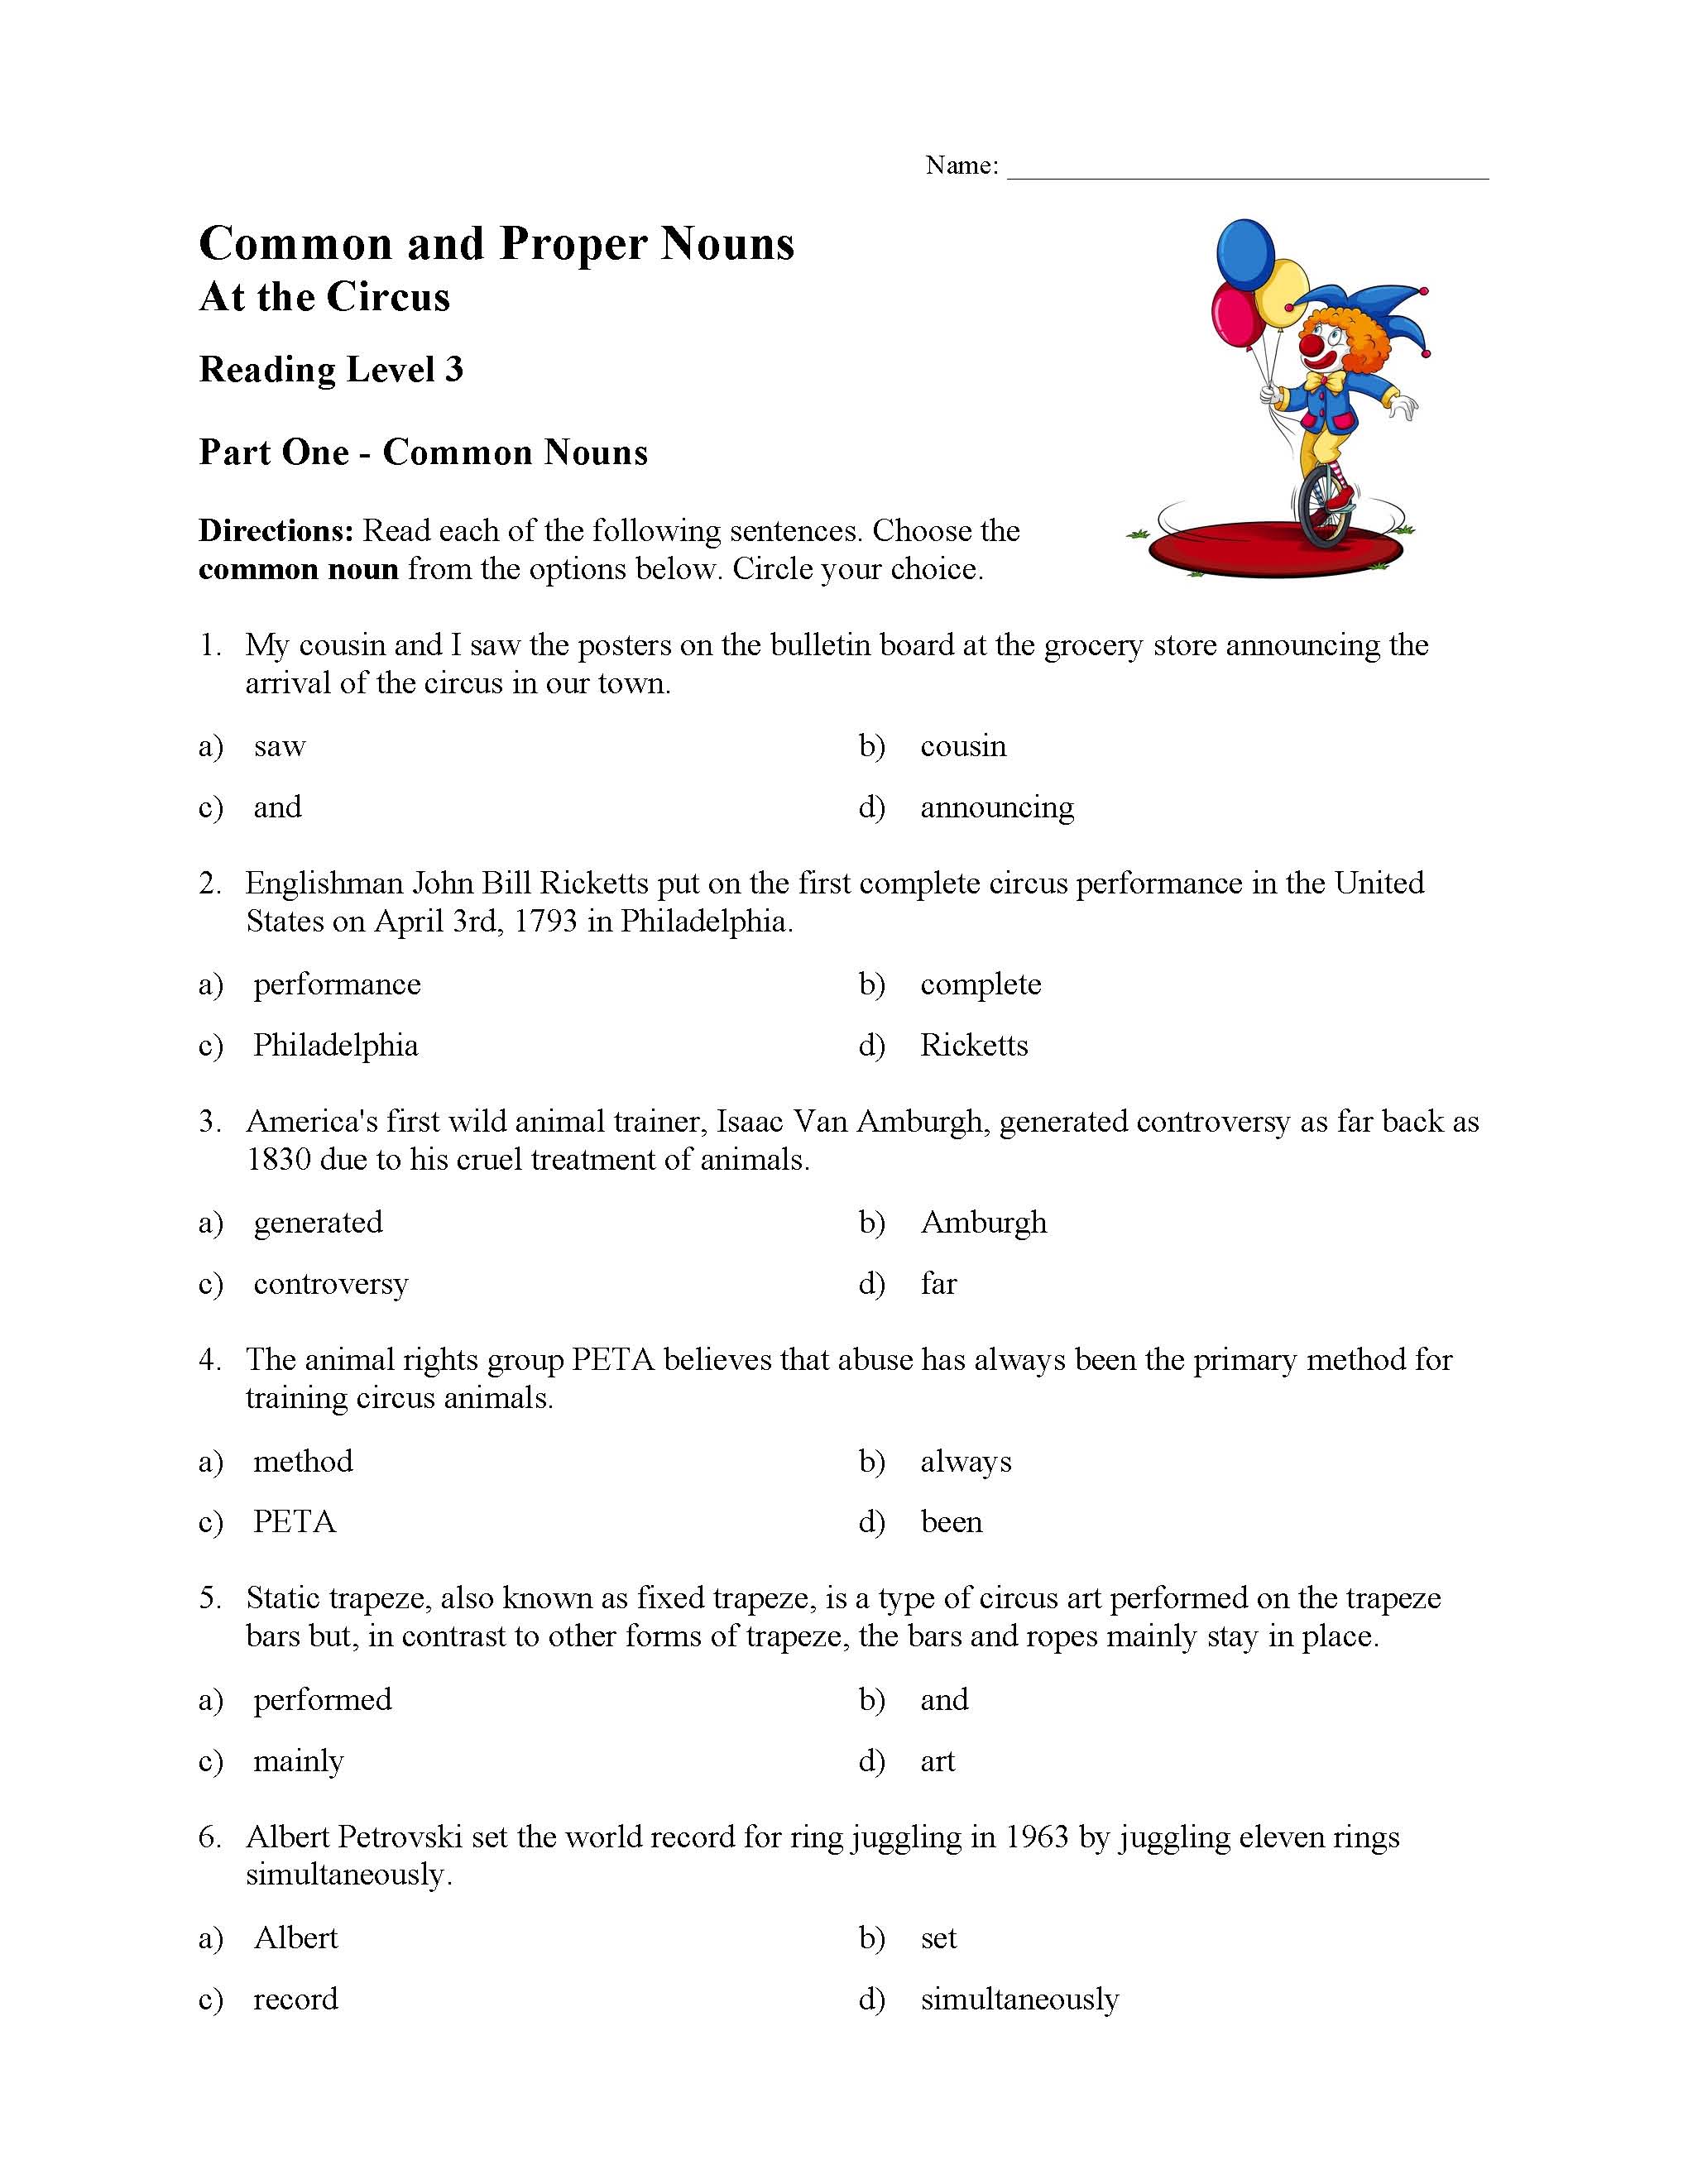 Common And Proper Noun Worksheet For Class 3 Common And Proper Noun Lesson Ideas For Kids